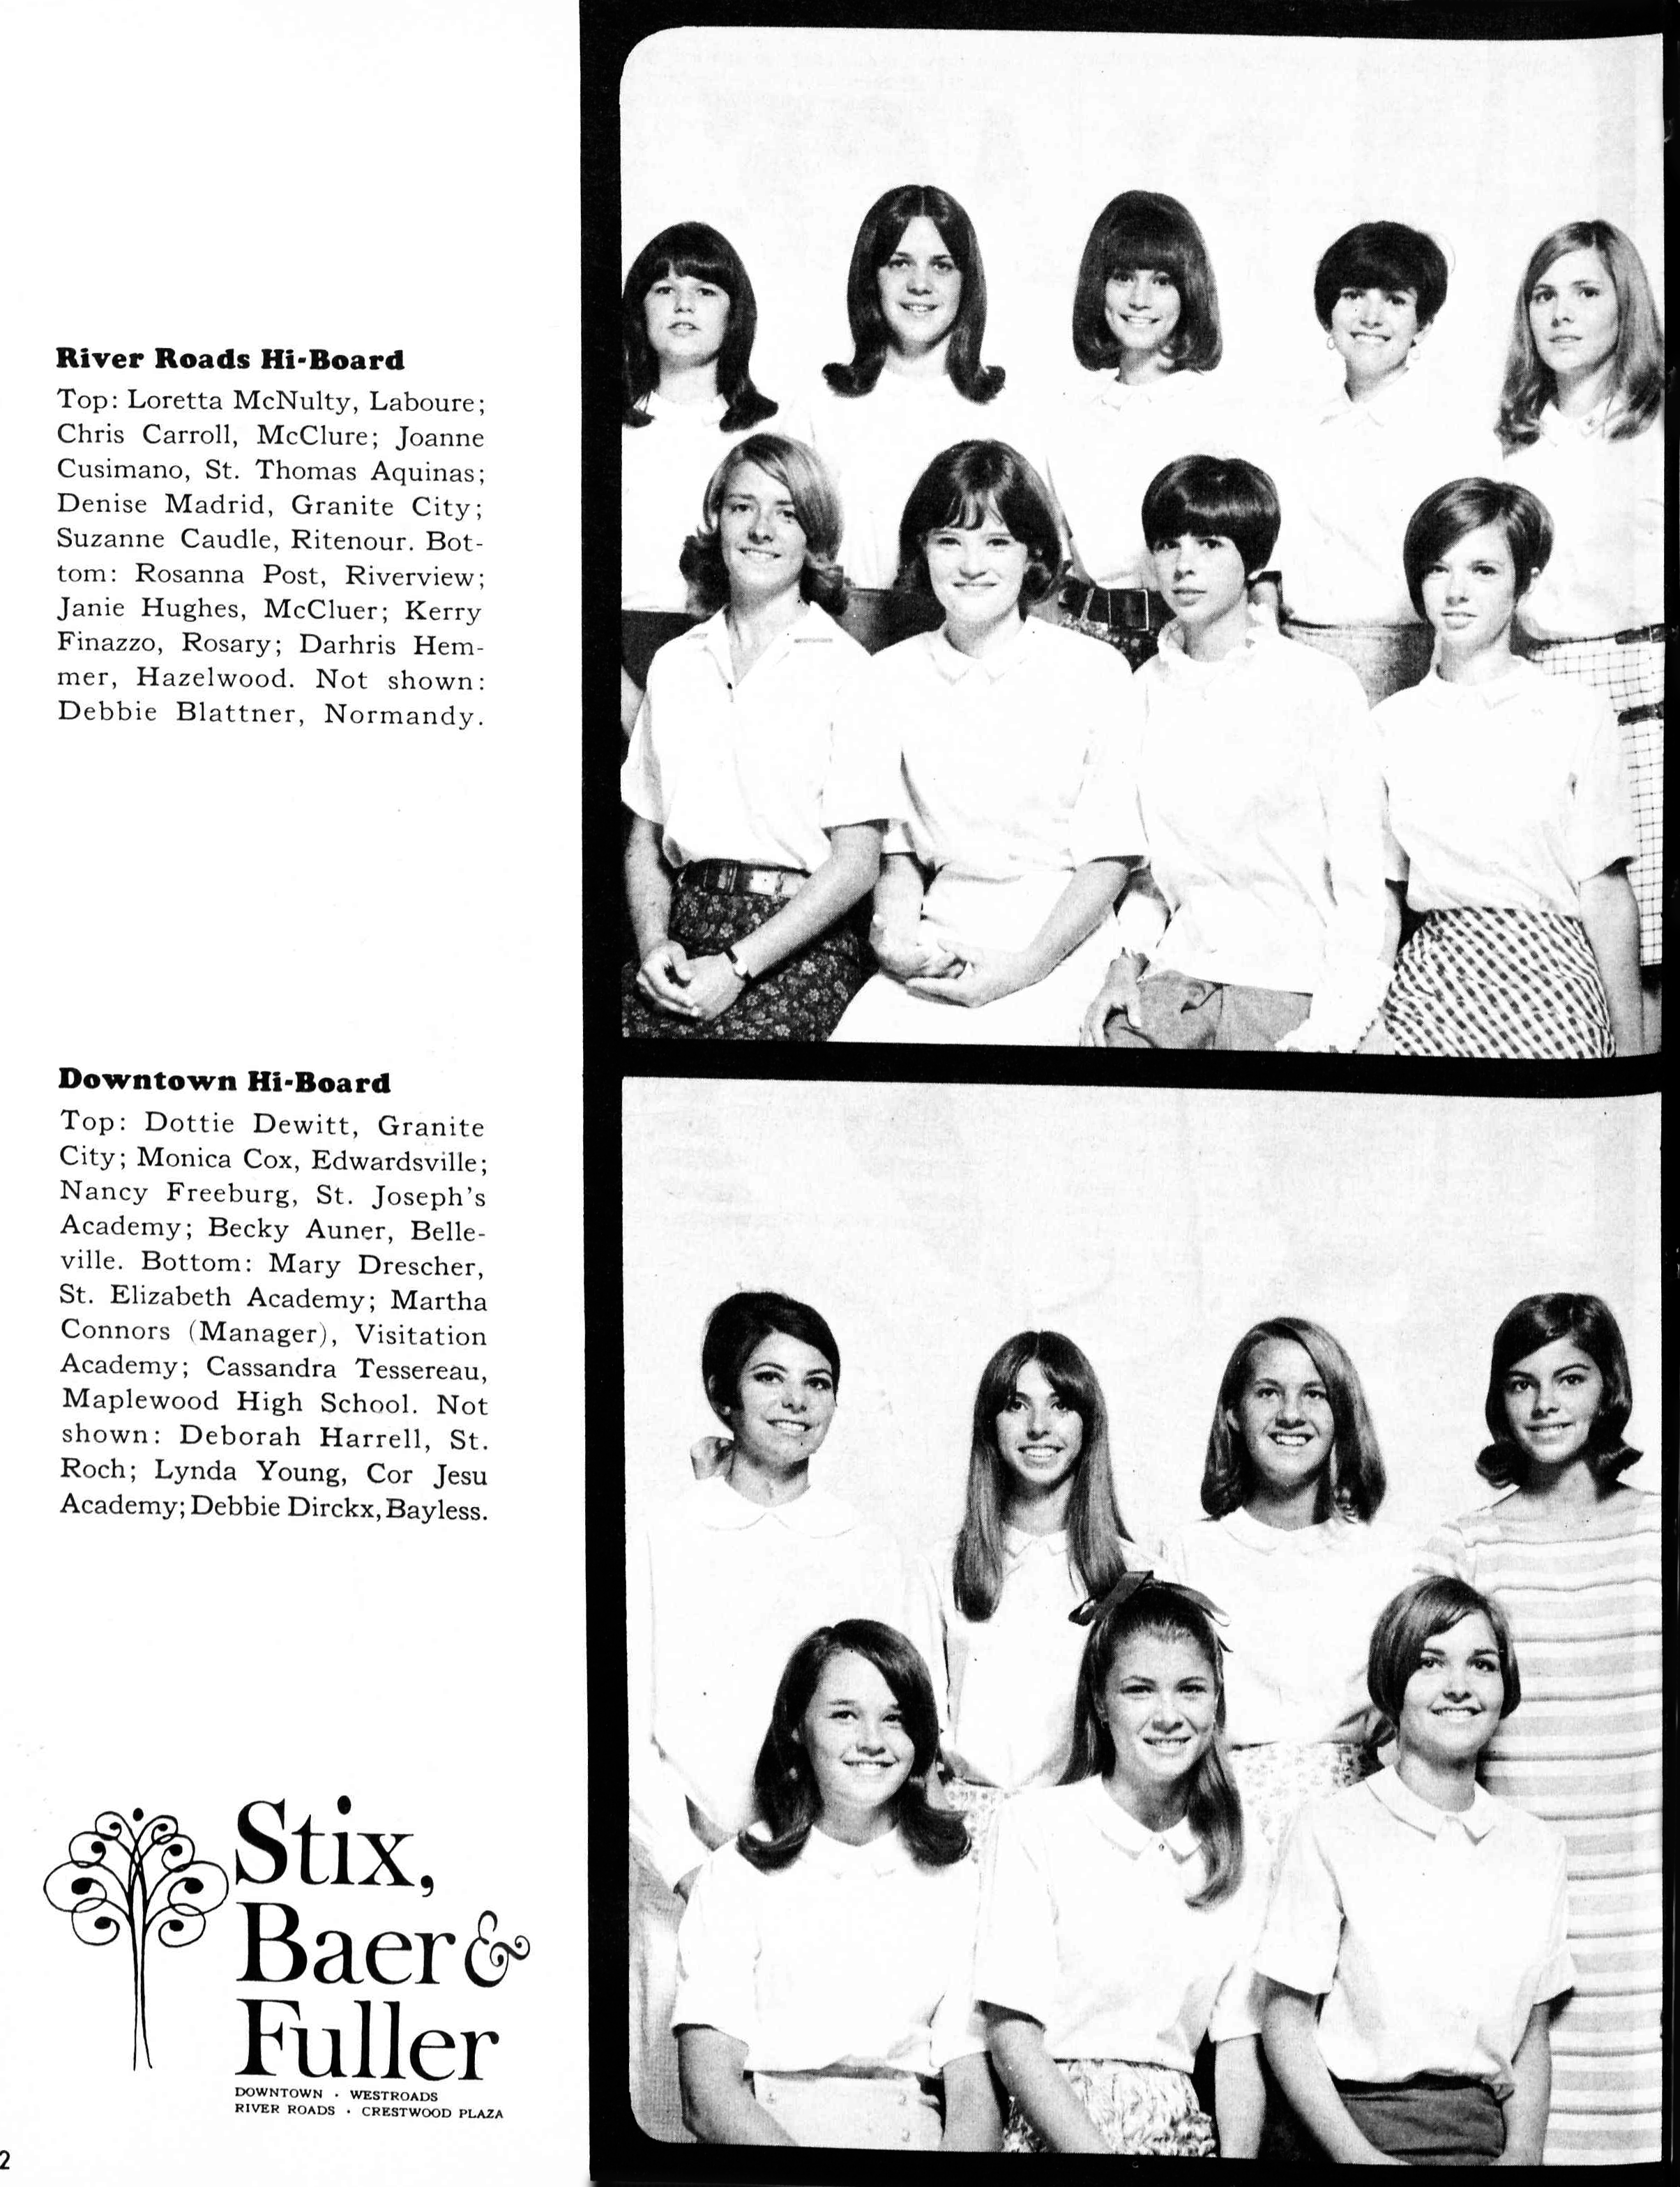 RGHS JUNIOR (CLASS OF 1969) Roseann Post of the Stix, Baer & Fuller River Roads Hi-Board is featured in PROM MAGAZINE AUGUST 1967.